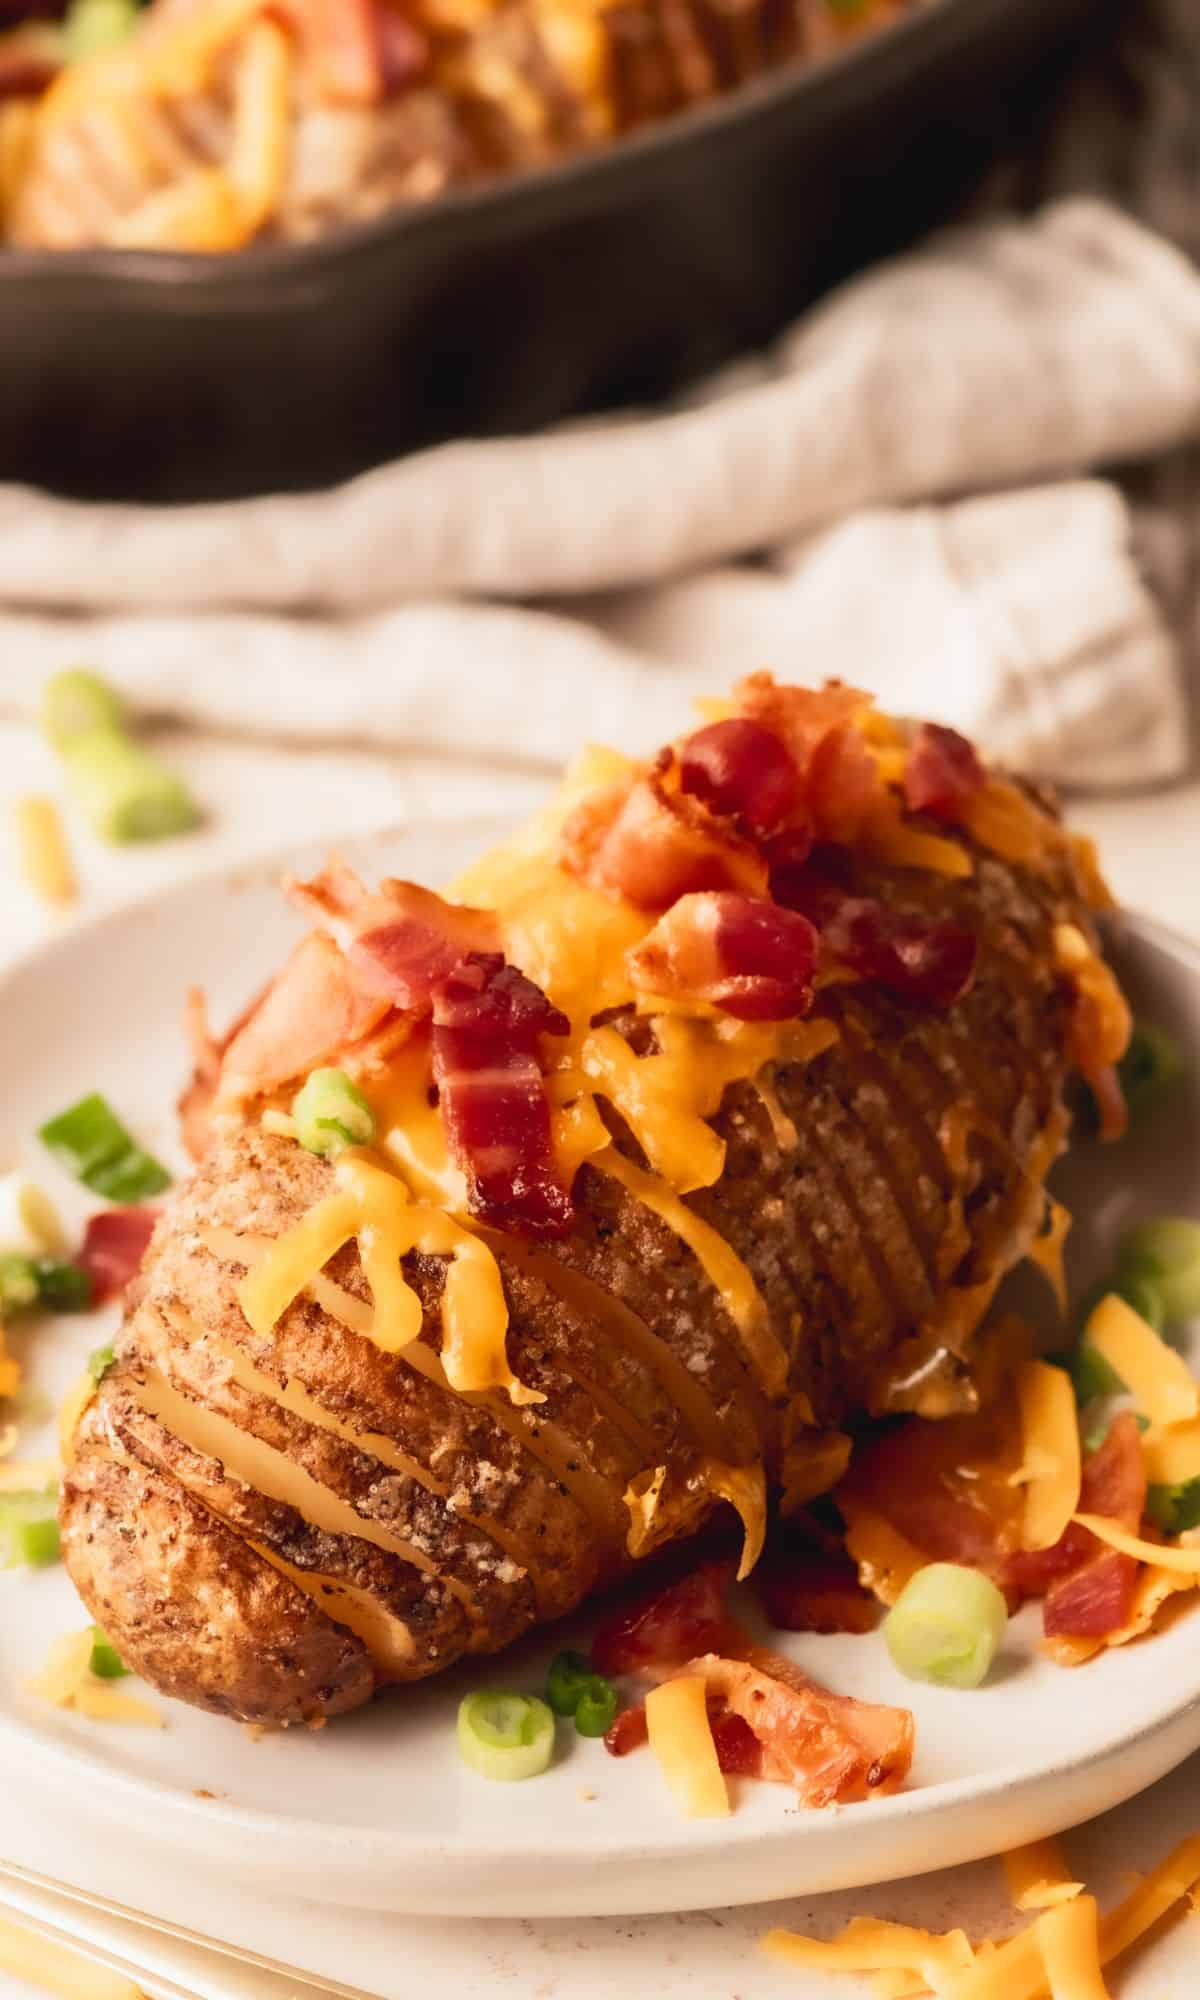 Hasselback potato with cheese and bacon on a white plate.